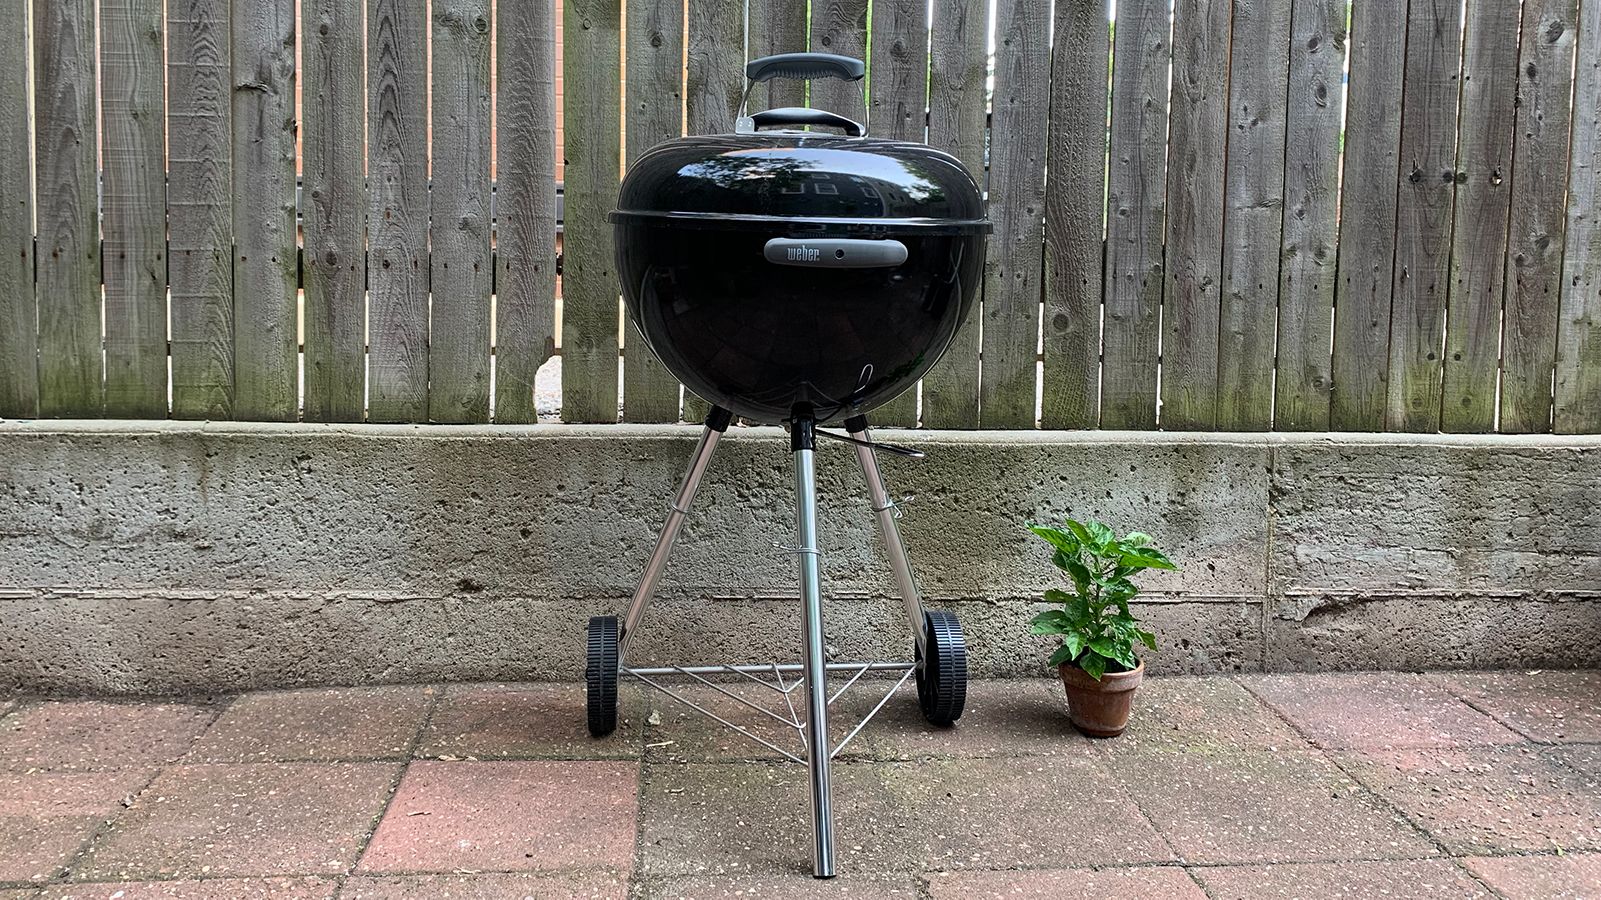 Best charcoal grills in 2024, tested by editors